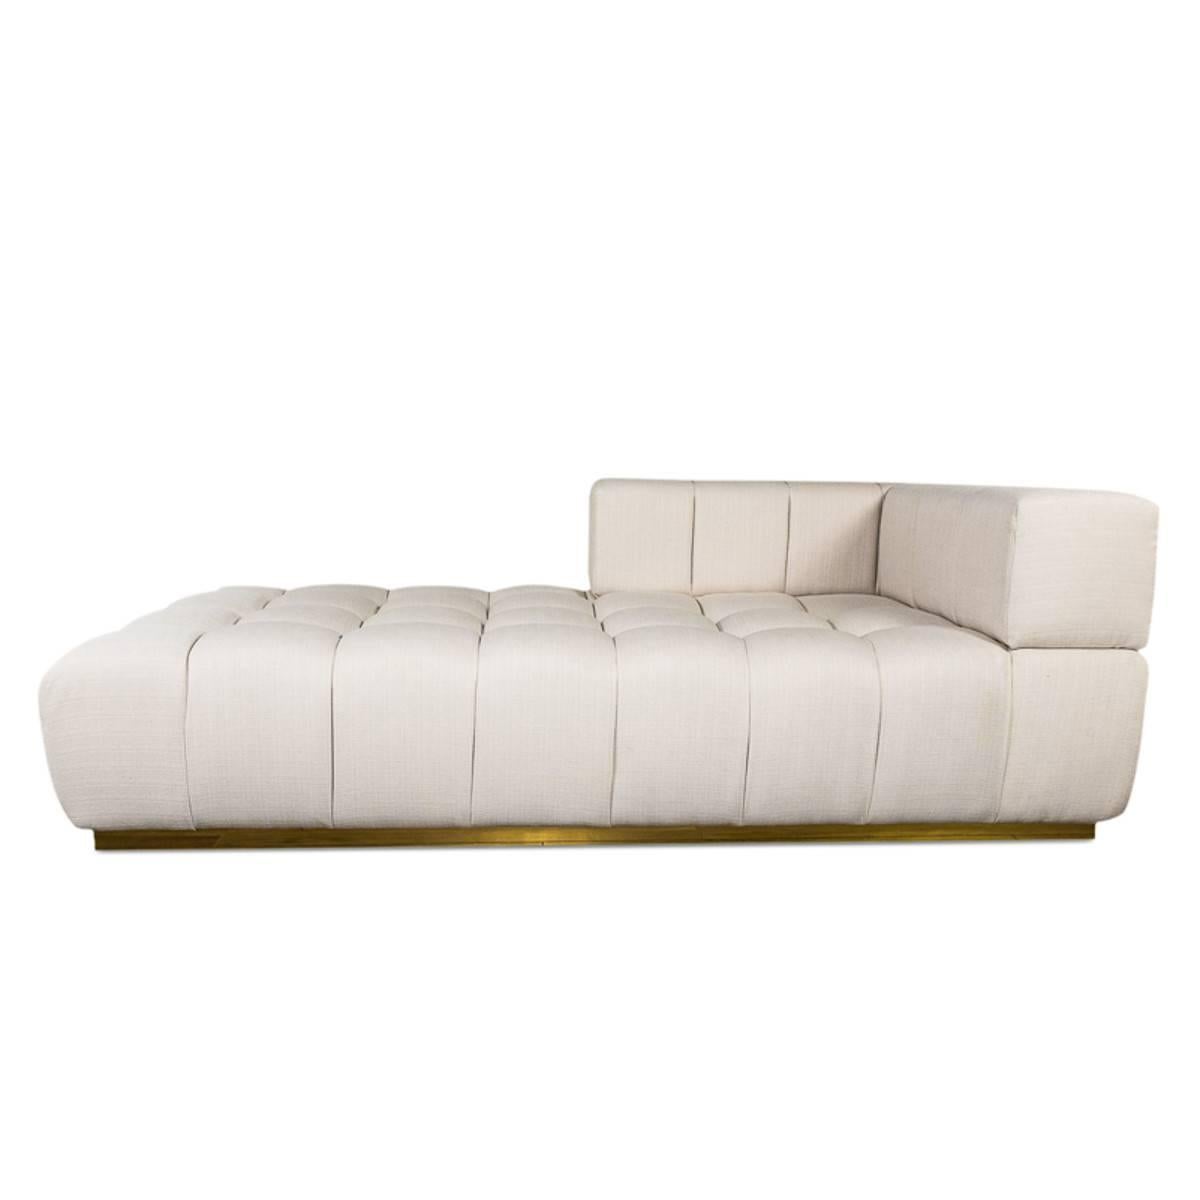 Relax in style and unparalleled comfort in our new daybed. The luxurious tufting and laid back Silhouette is begging for a day in, lounging with a book or a cocktail. 

Dimensions:

84